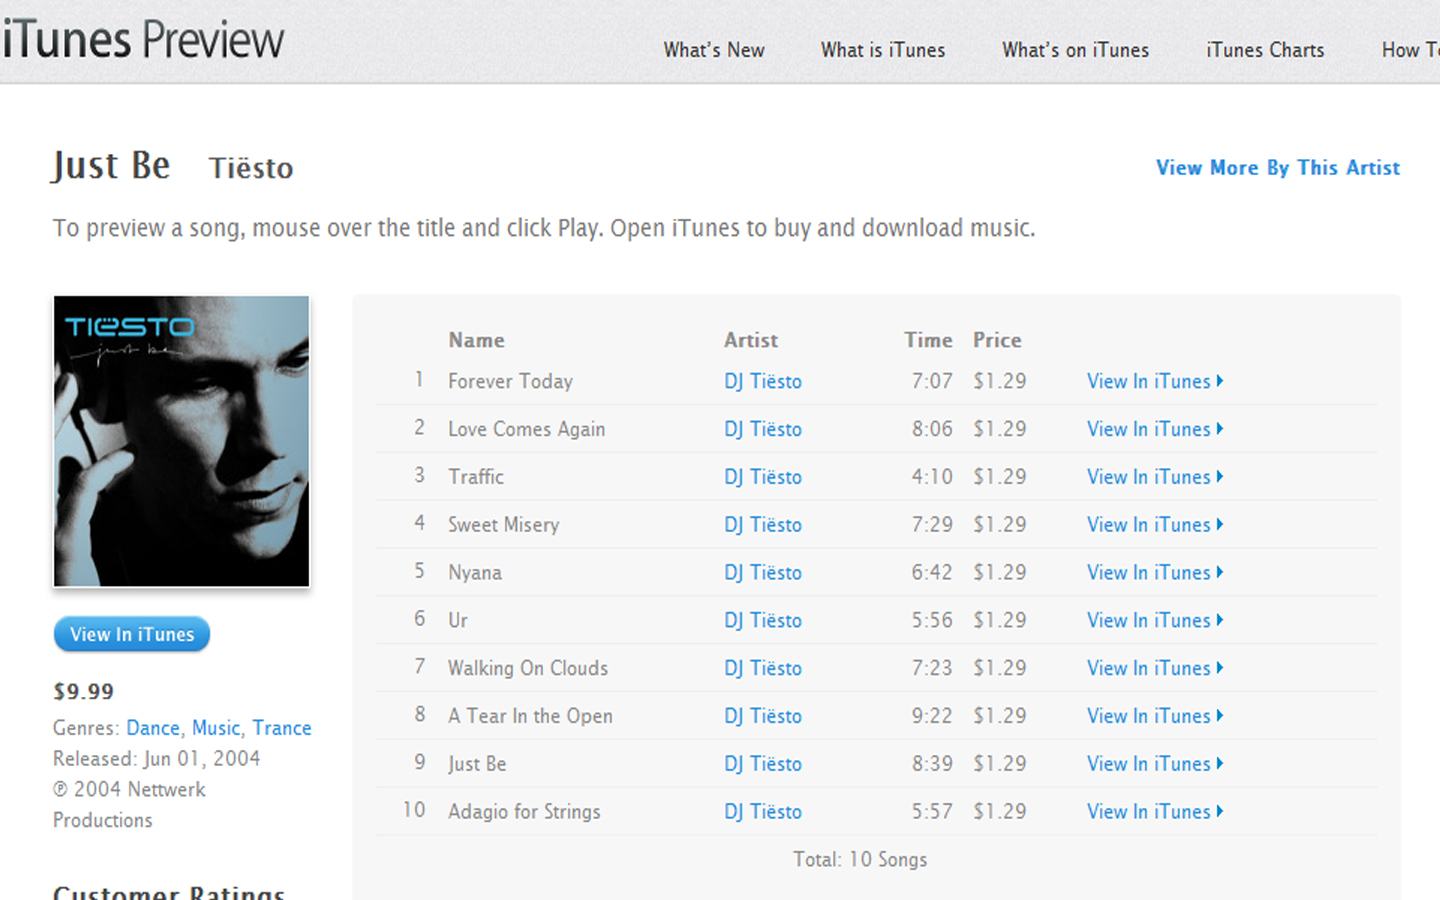 Itunes Albums Of Tiësto Just Be Itunes Plus Aac M4a 